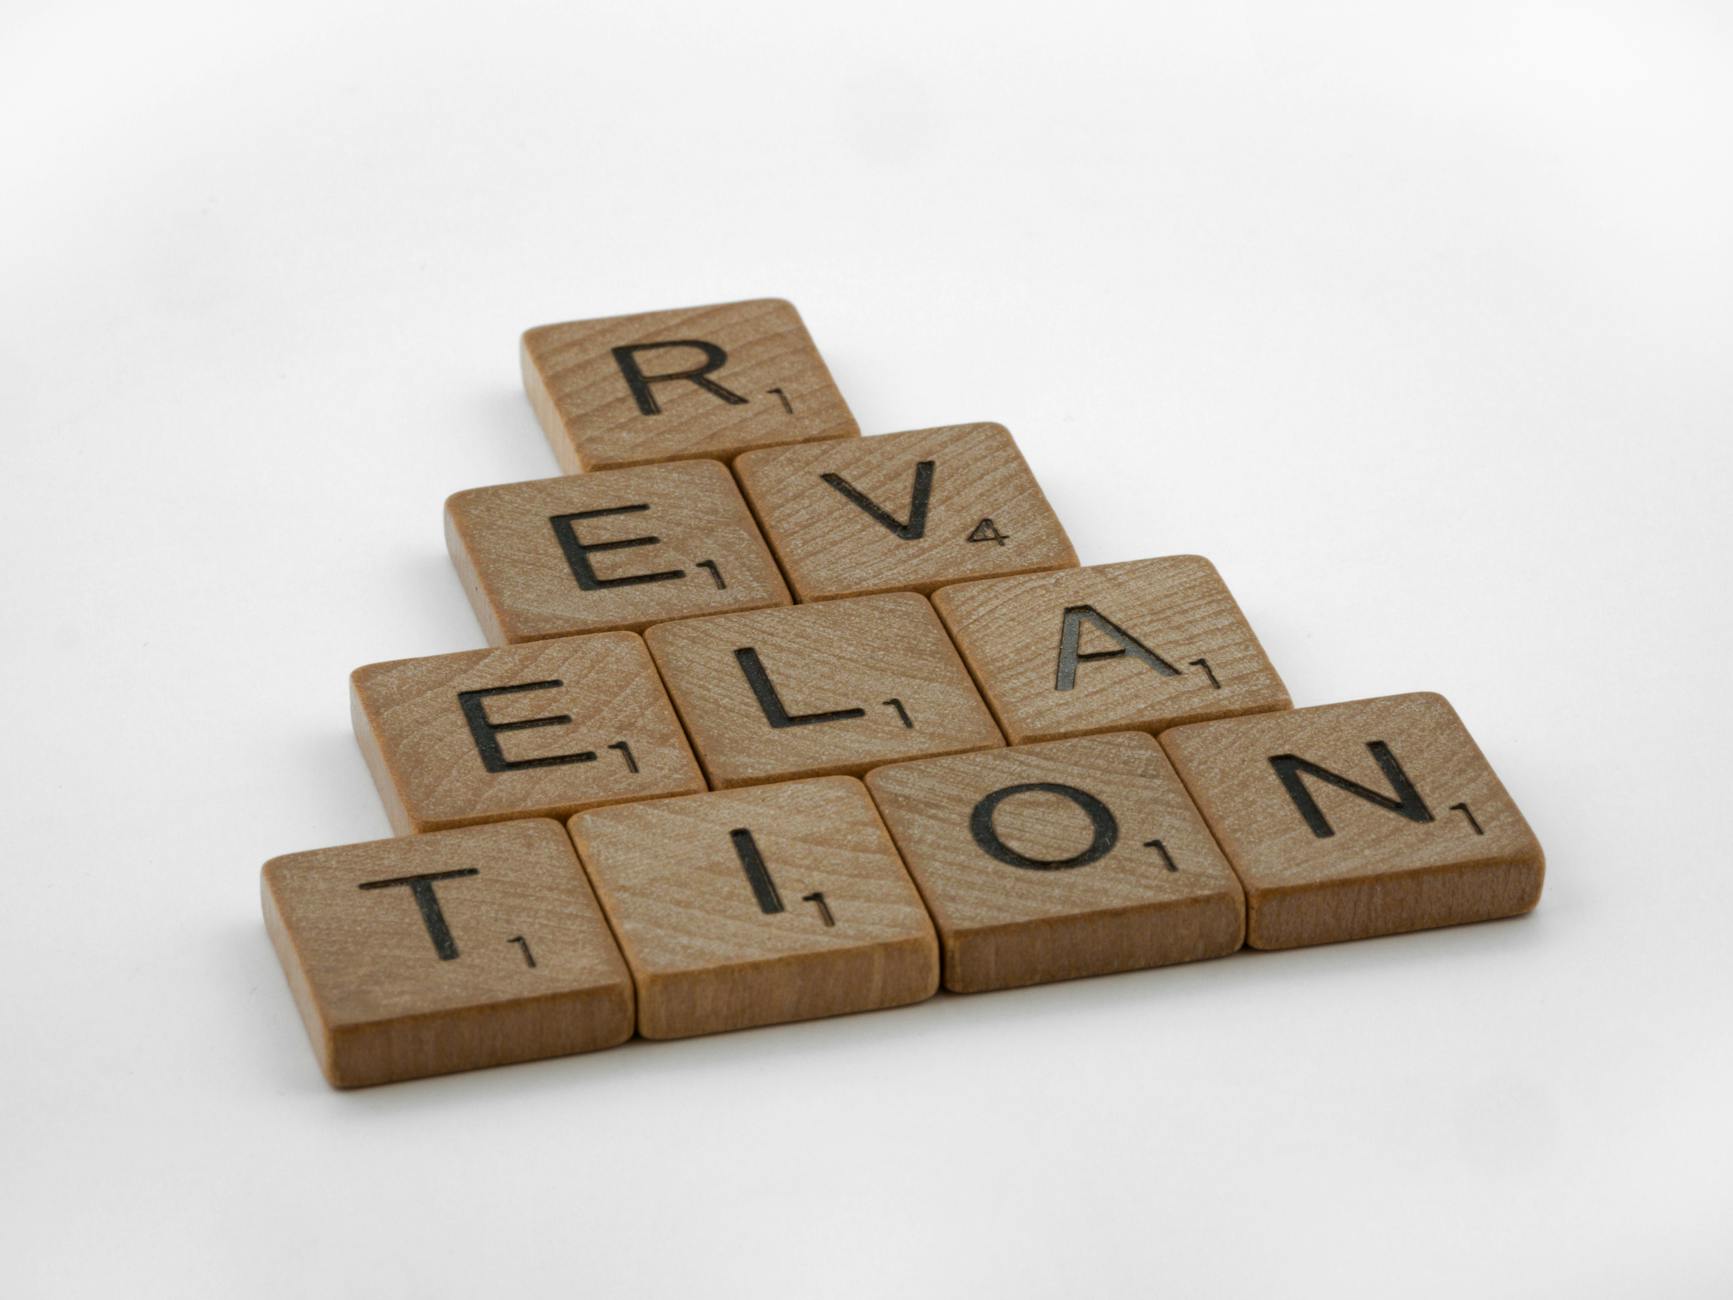 revelation sign out of scrabble tiles